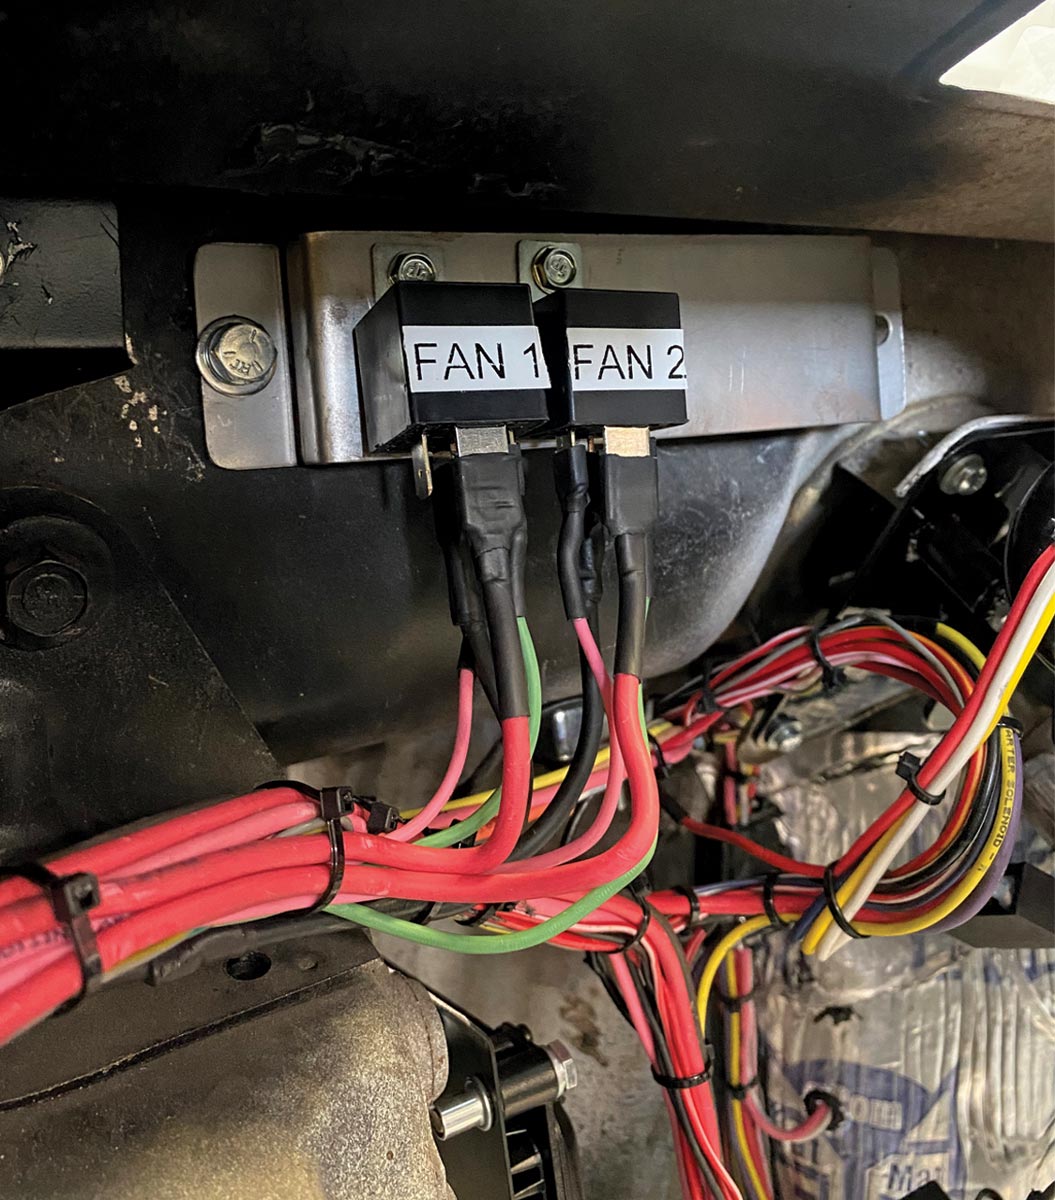 the fan relays bracket under the dash next to the main panel